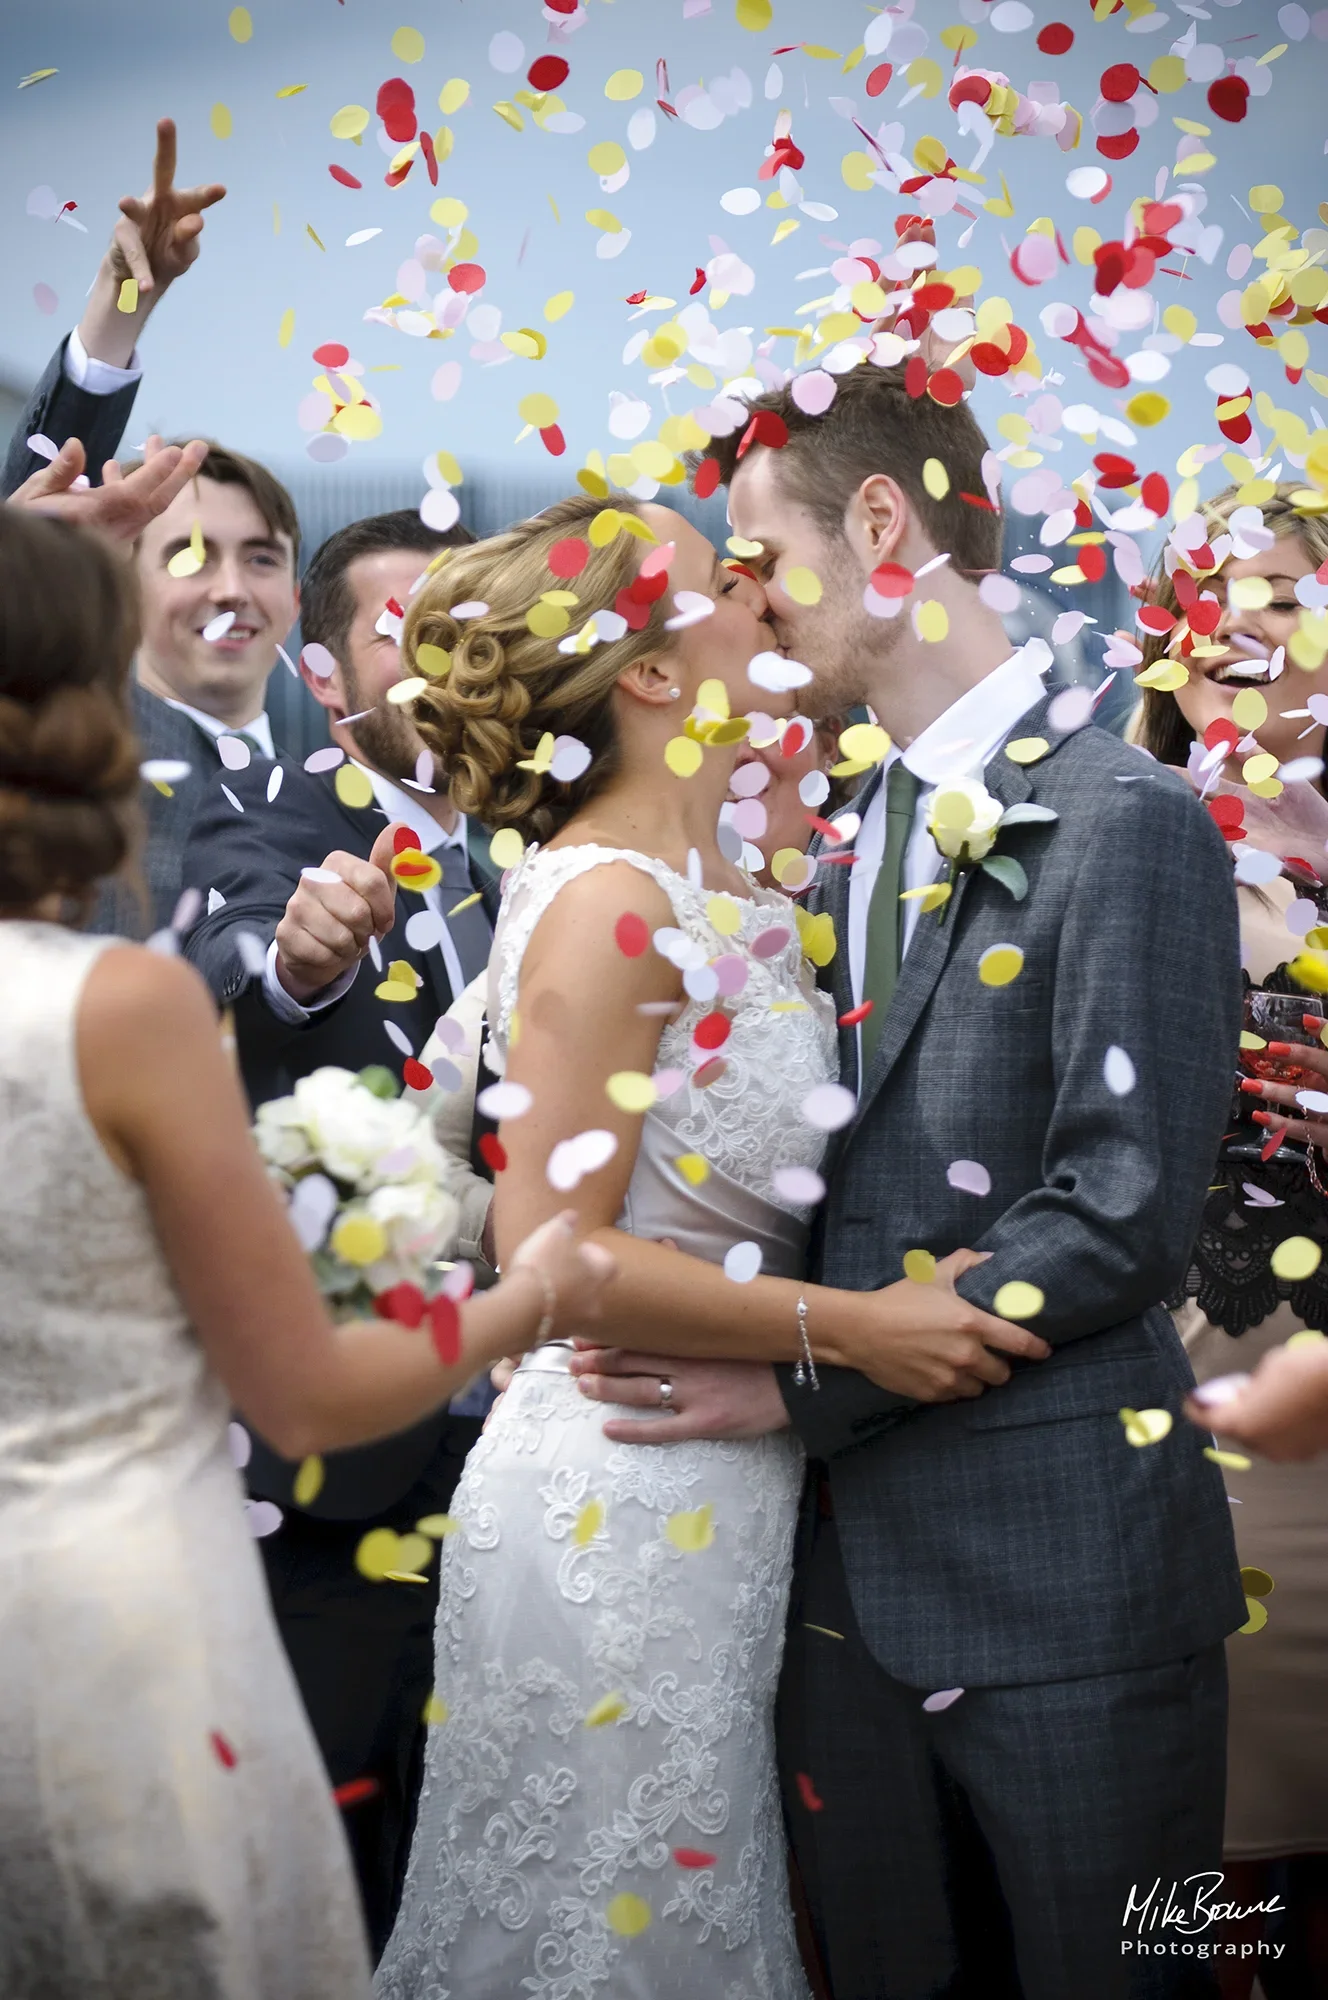 A young couple kiss as friends and family throw confetti in the air around them